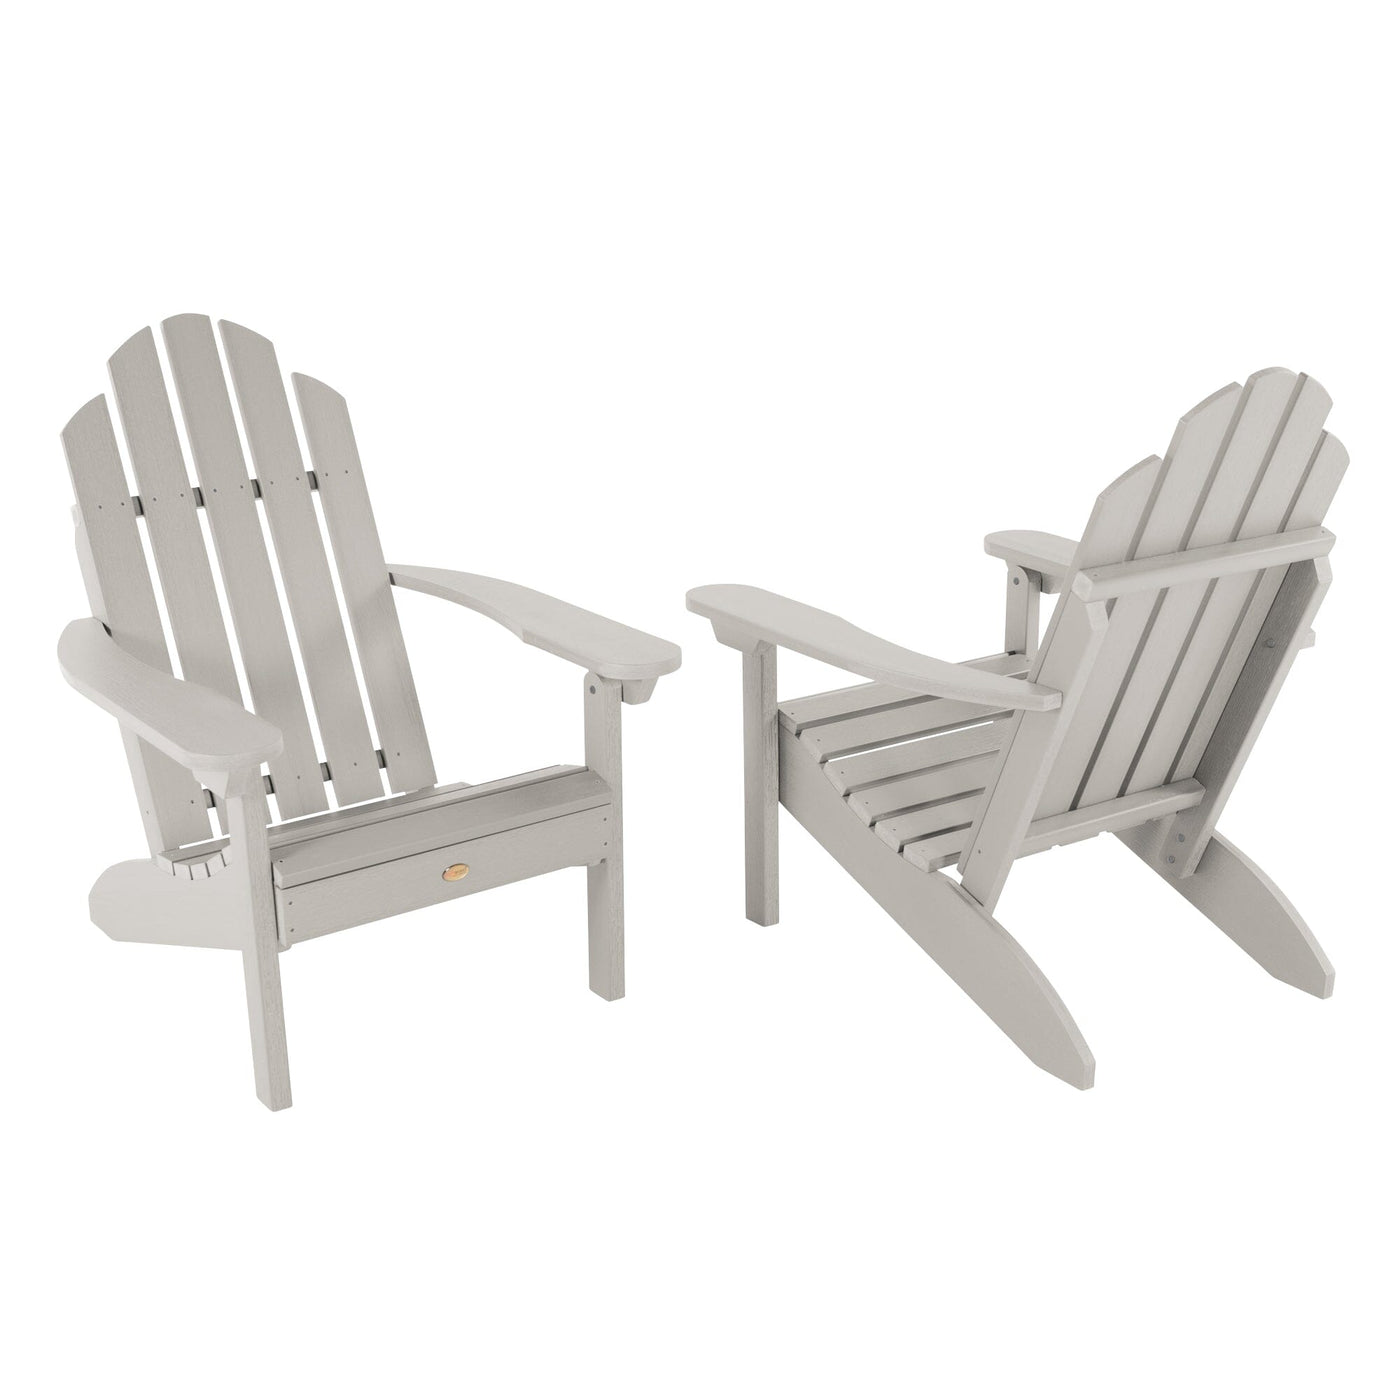 Set of Two Classic Westport Adirondack Chairs Kitted Sets Highwood USA 